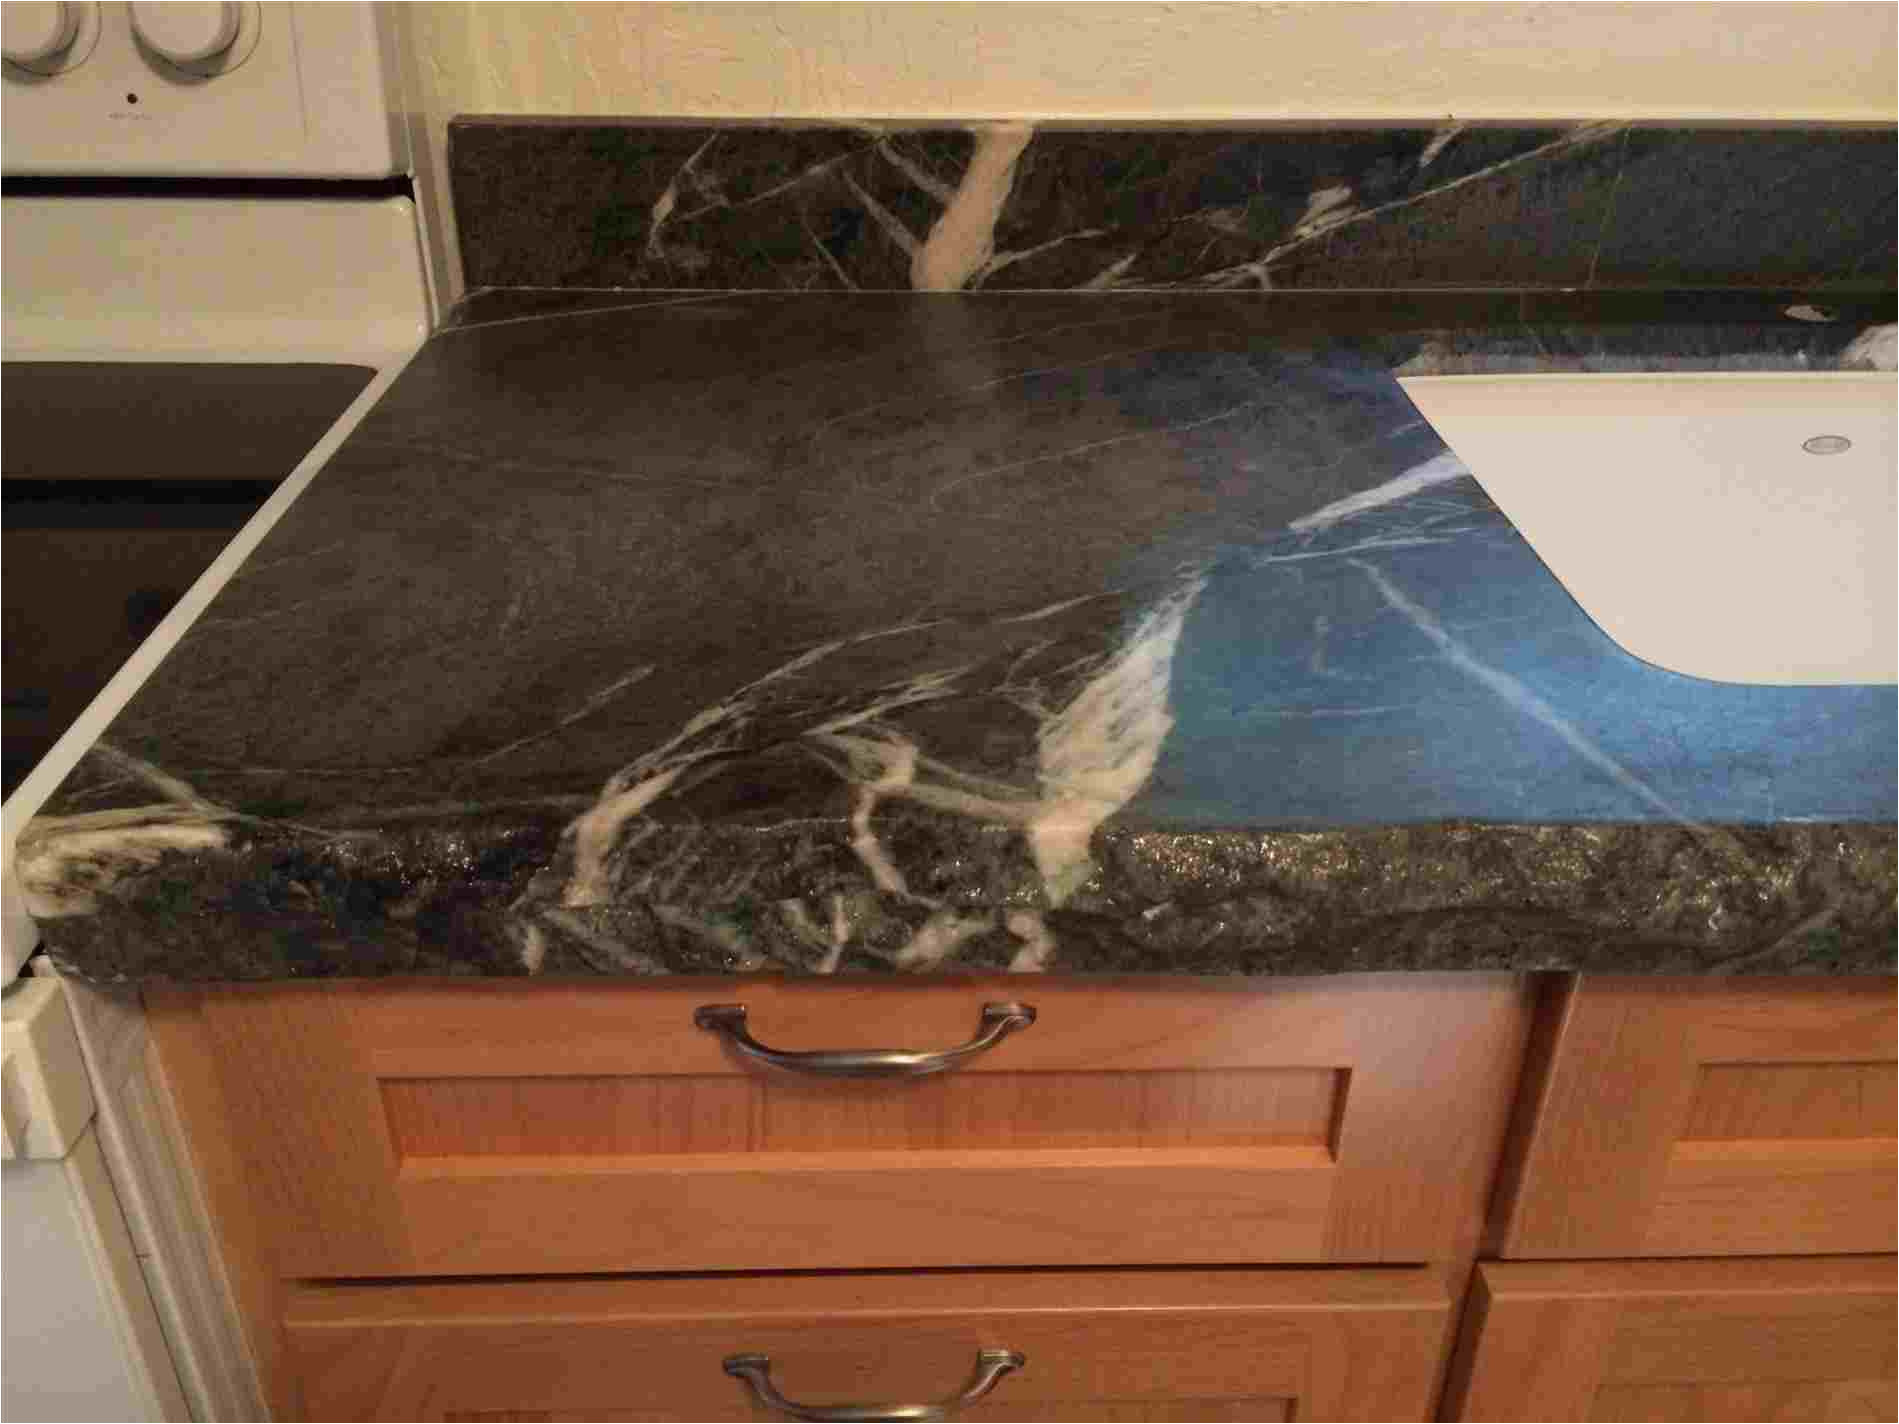 doublethick with edges rhpinterestcom doublethick rough edge granite countertops granite with rough edges countertops rhpinterestcom half